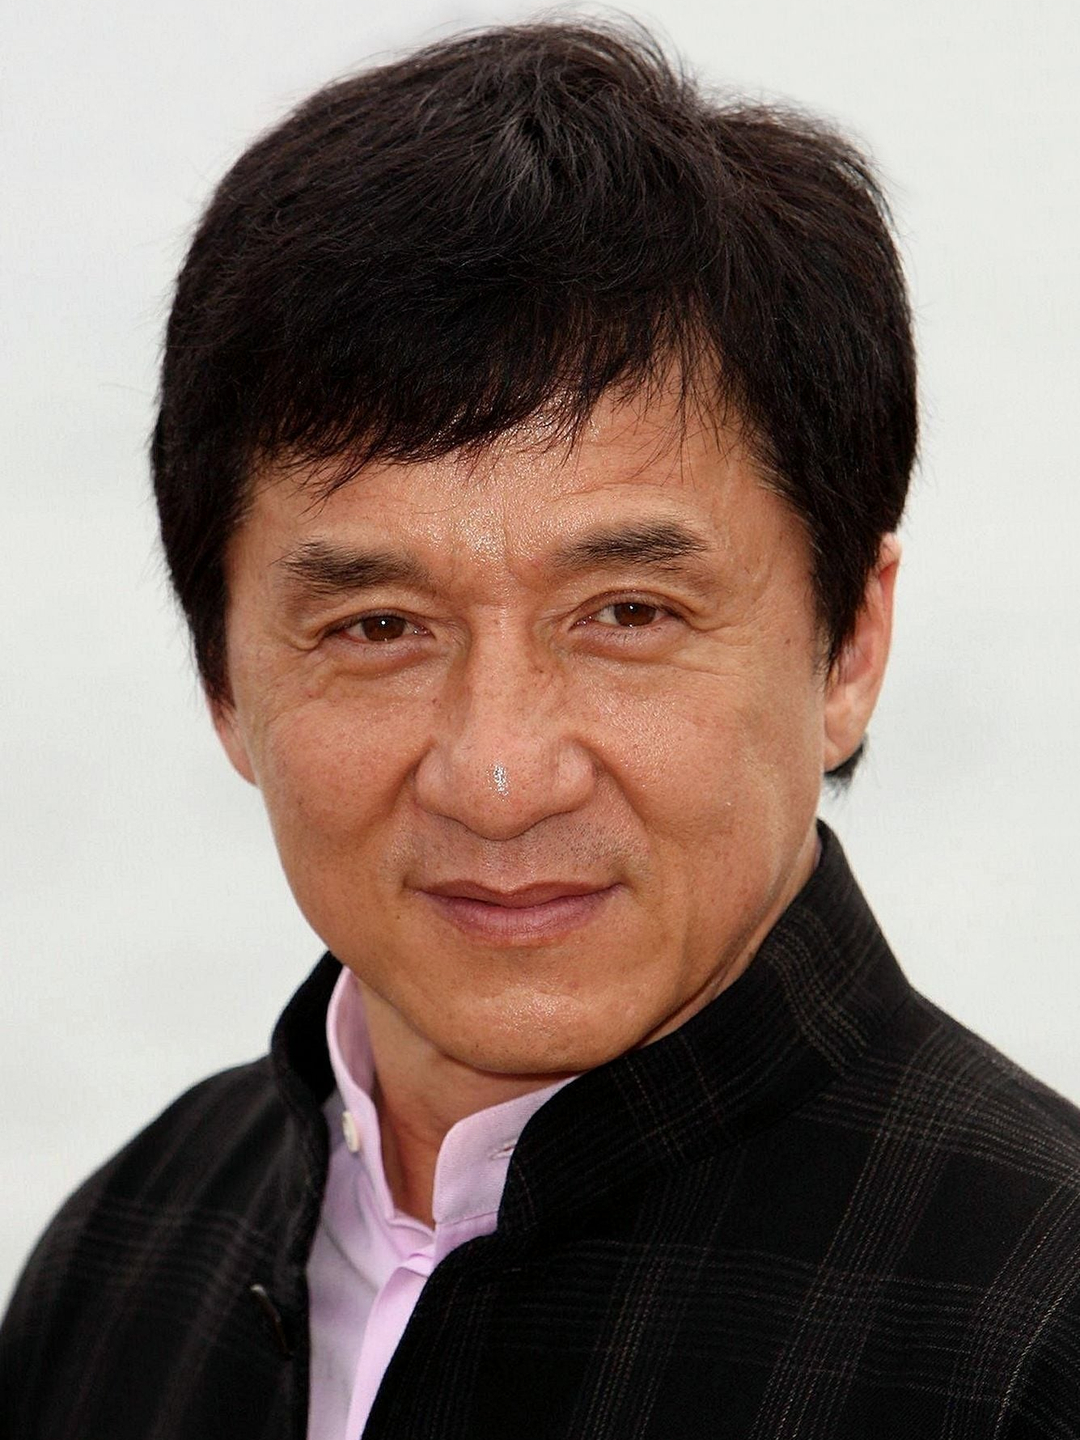 Jackie Chan young photos